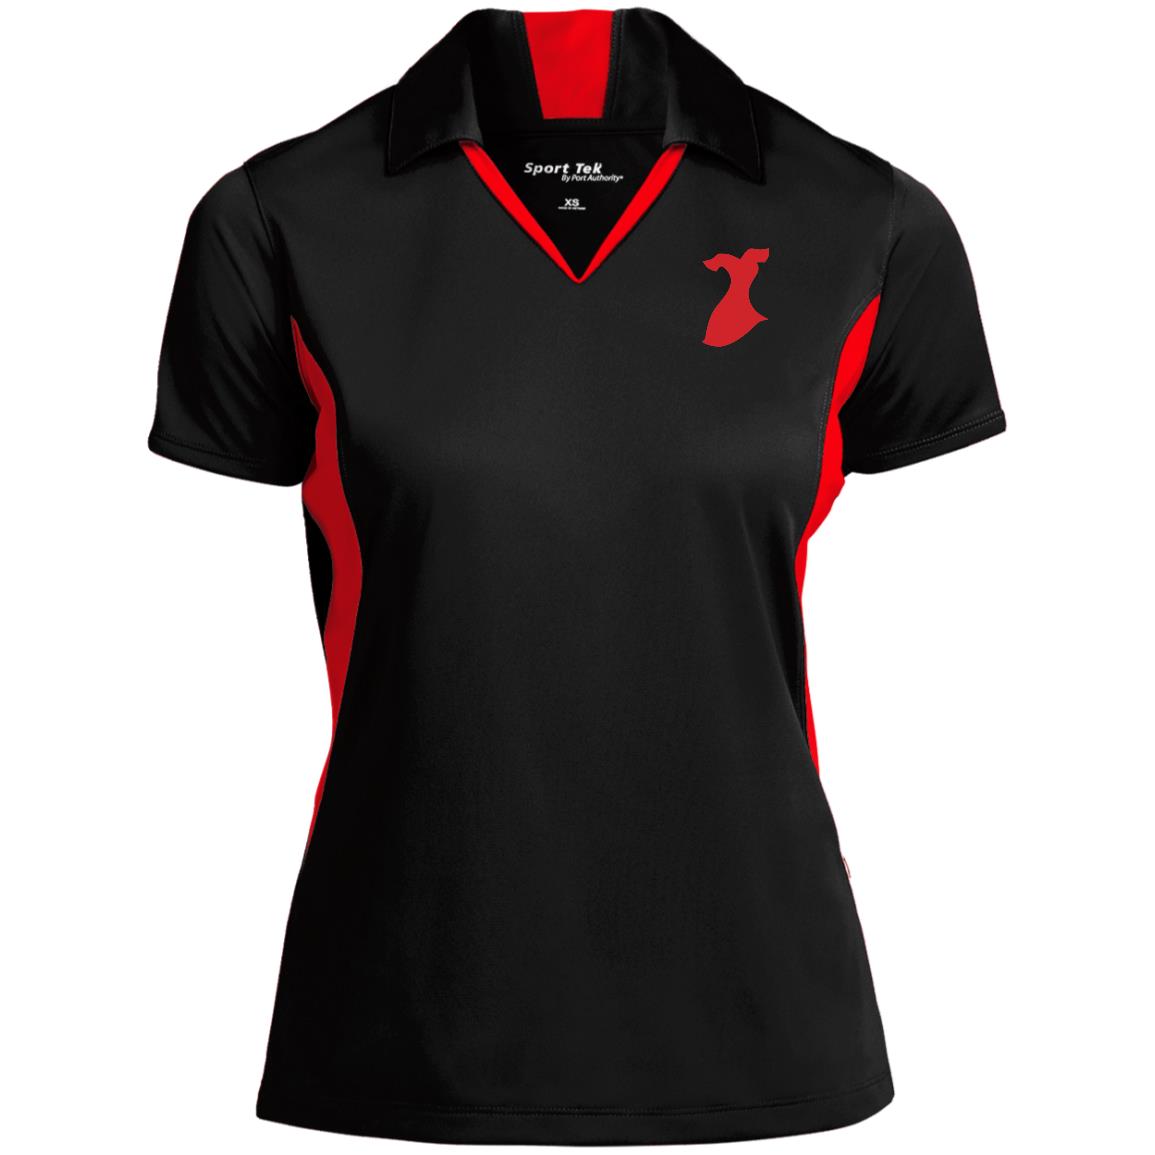 Go Red Ladies' Colorblock Performance Polo